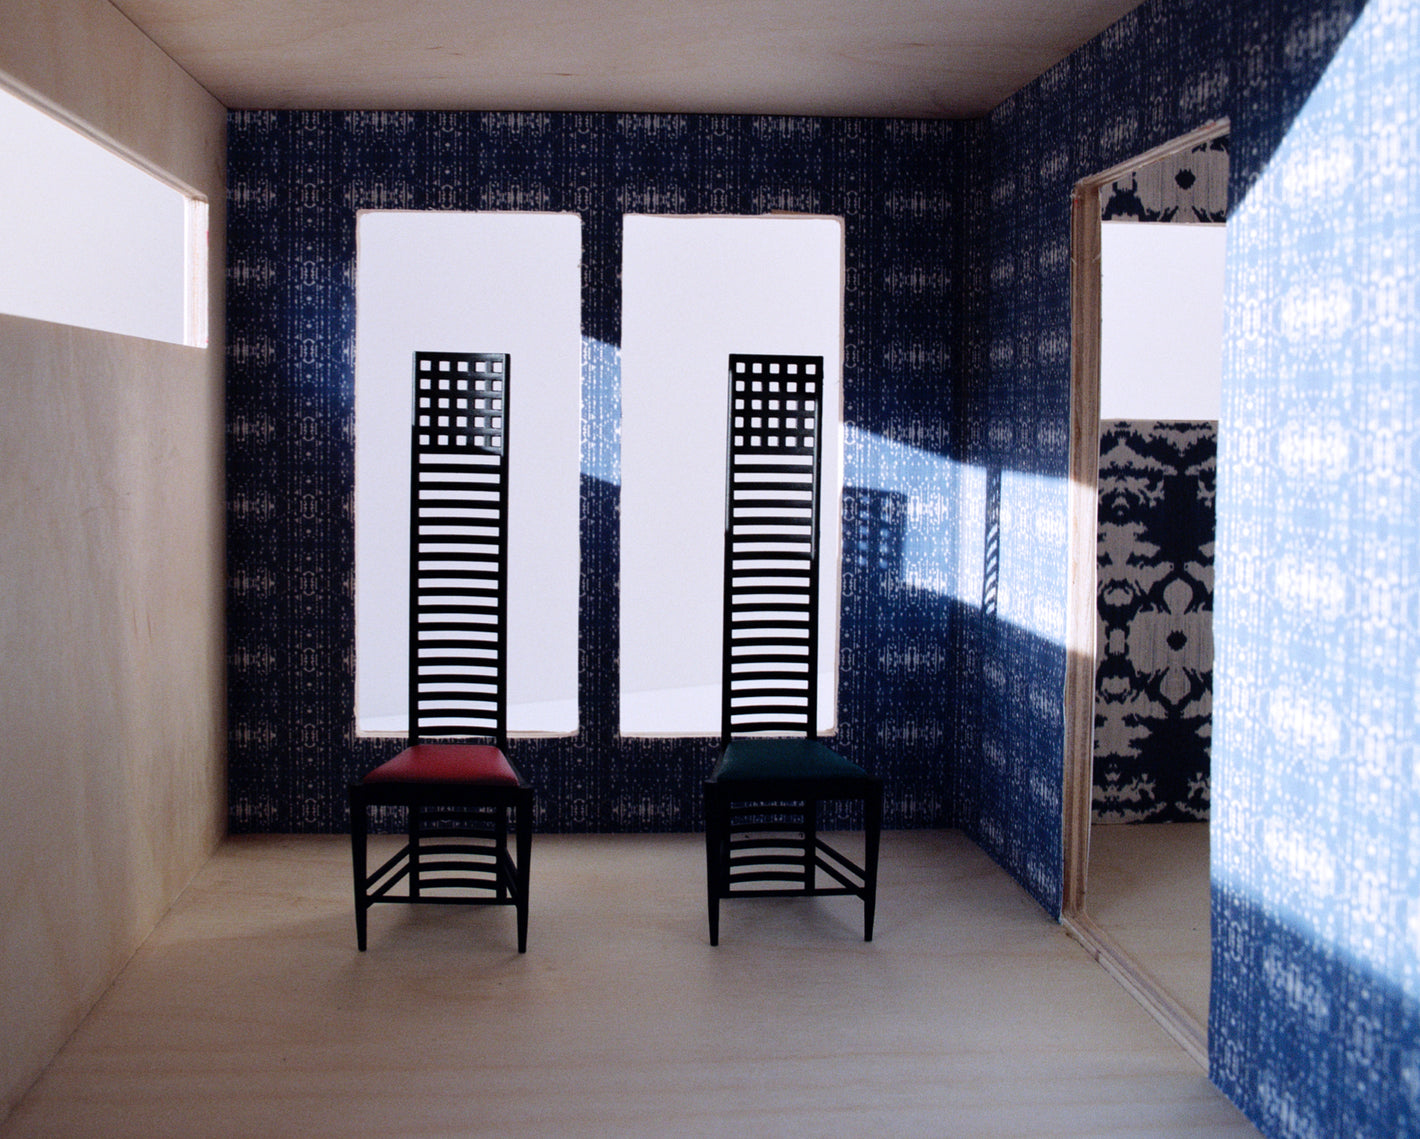 Two chairs in a room with blue wallpaper